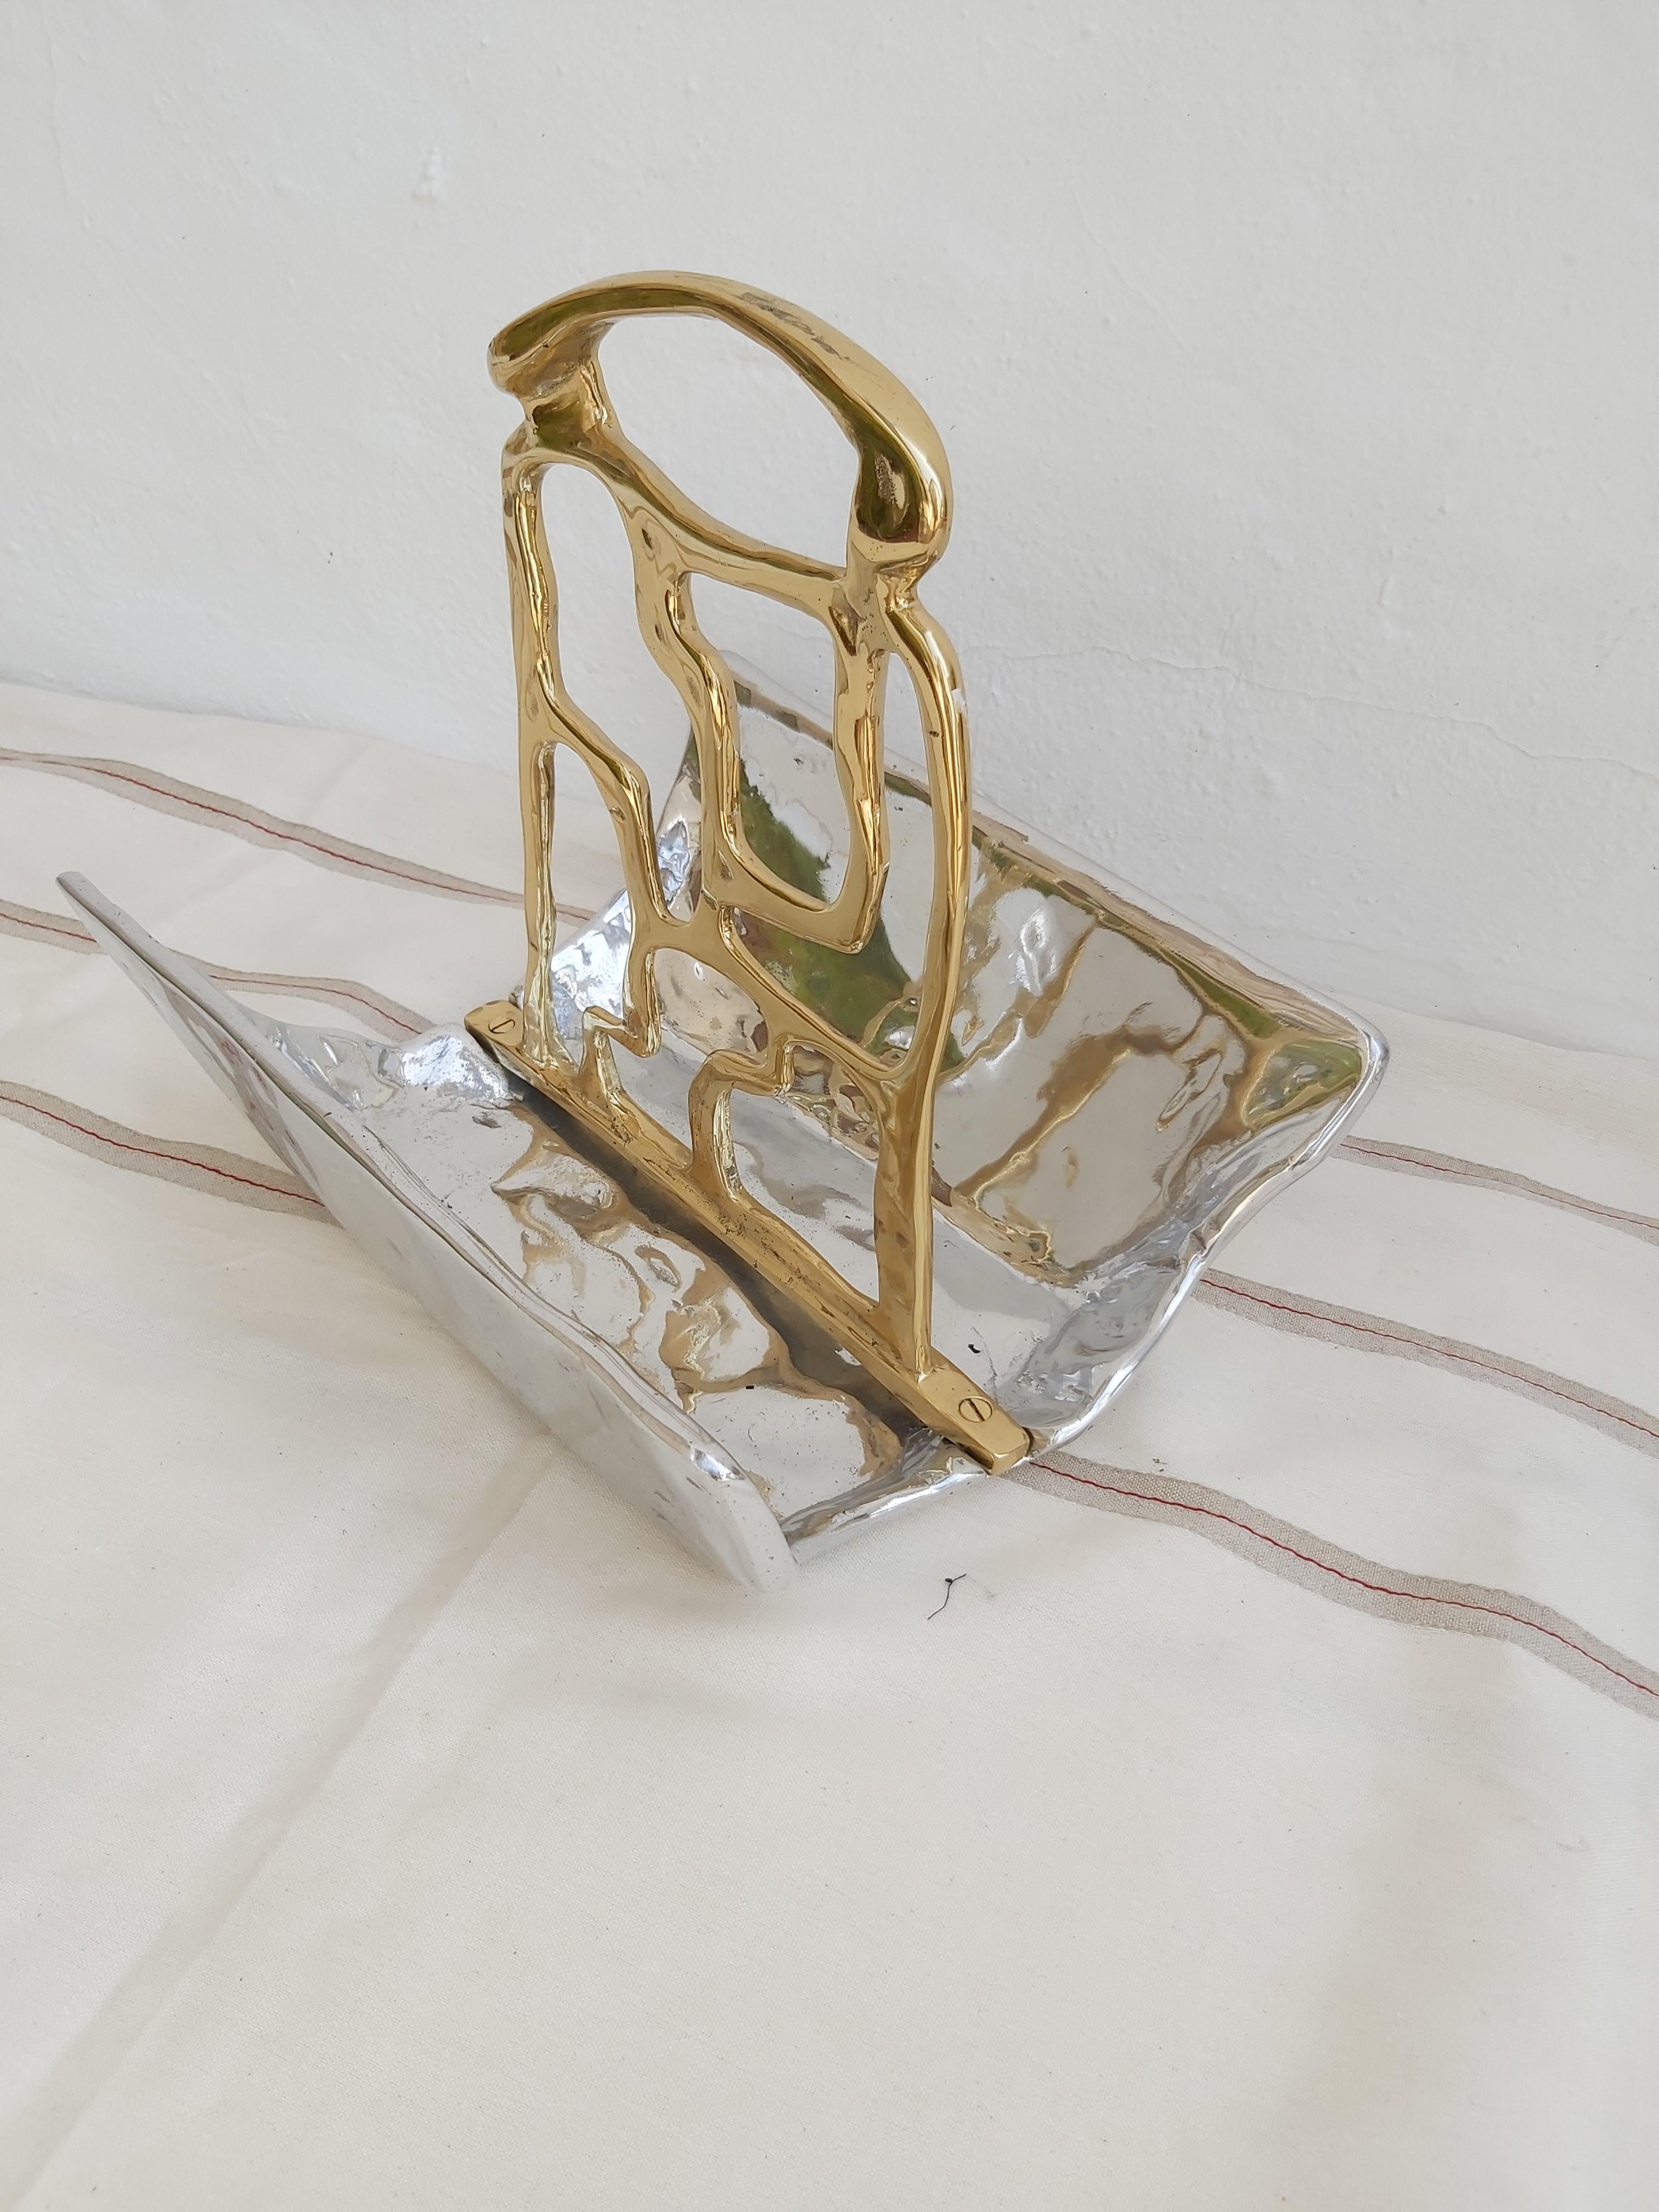 Hand-Crafted Metal Brutalist Magazine Rack Solid Cast Brass and Aluminium Handmade in Spain For Sale